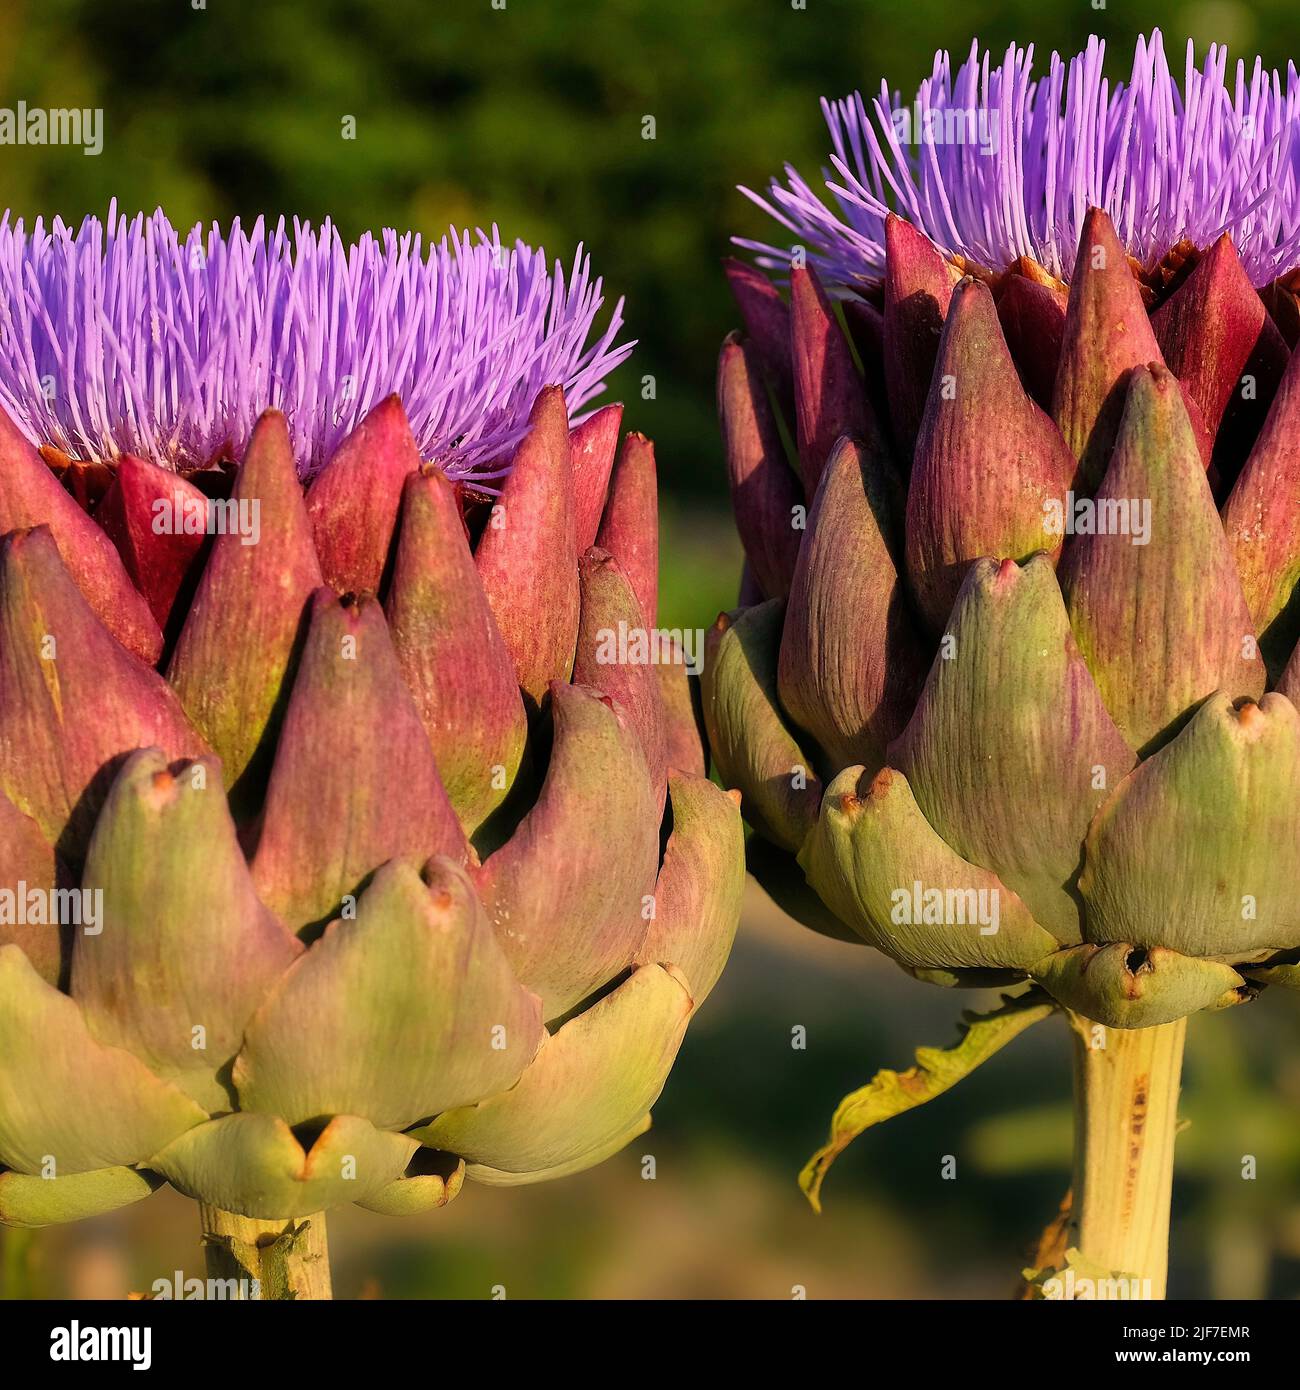 Close up image. Anemone like purple blooms of two artichokes. Numerous triangular scales of rich reds and greens. Soft focus background. Stock Photo